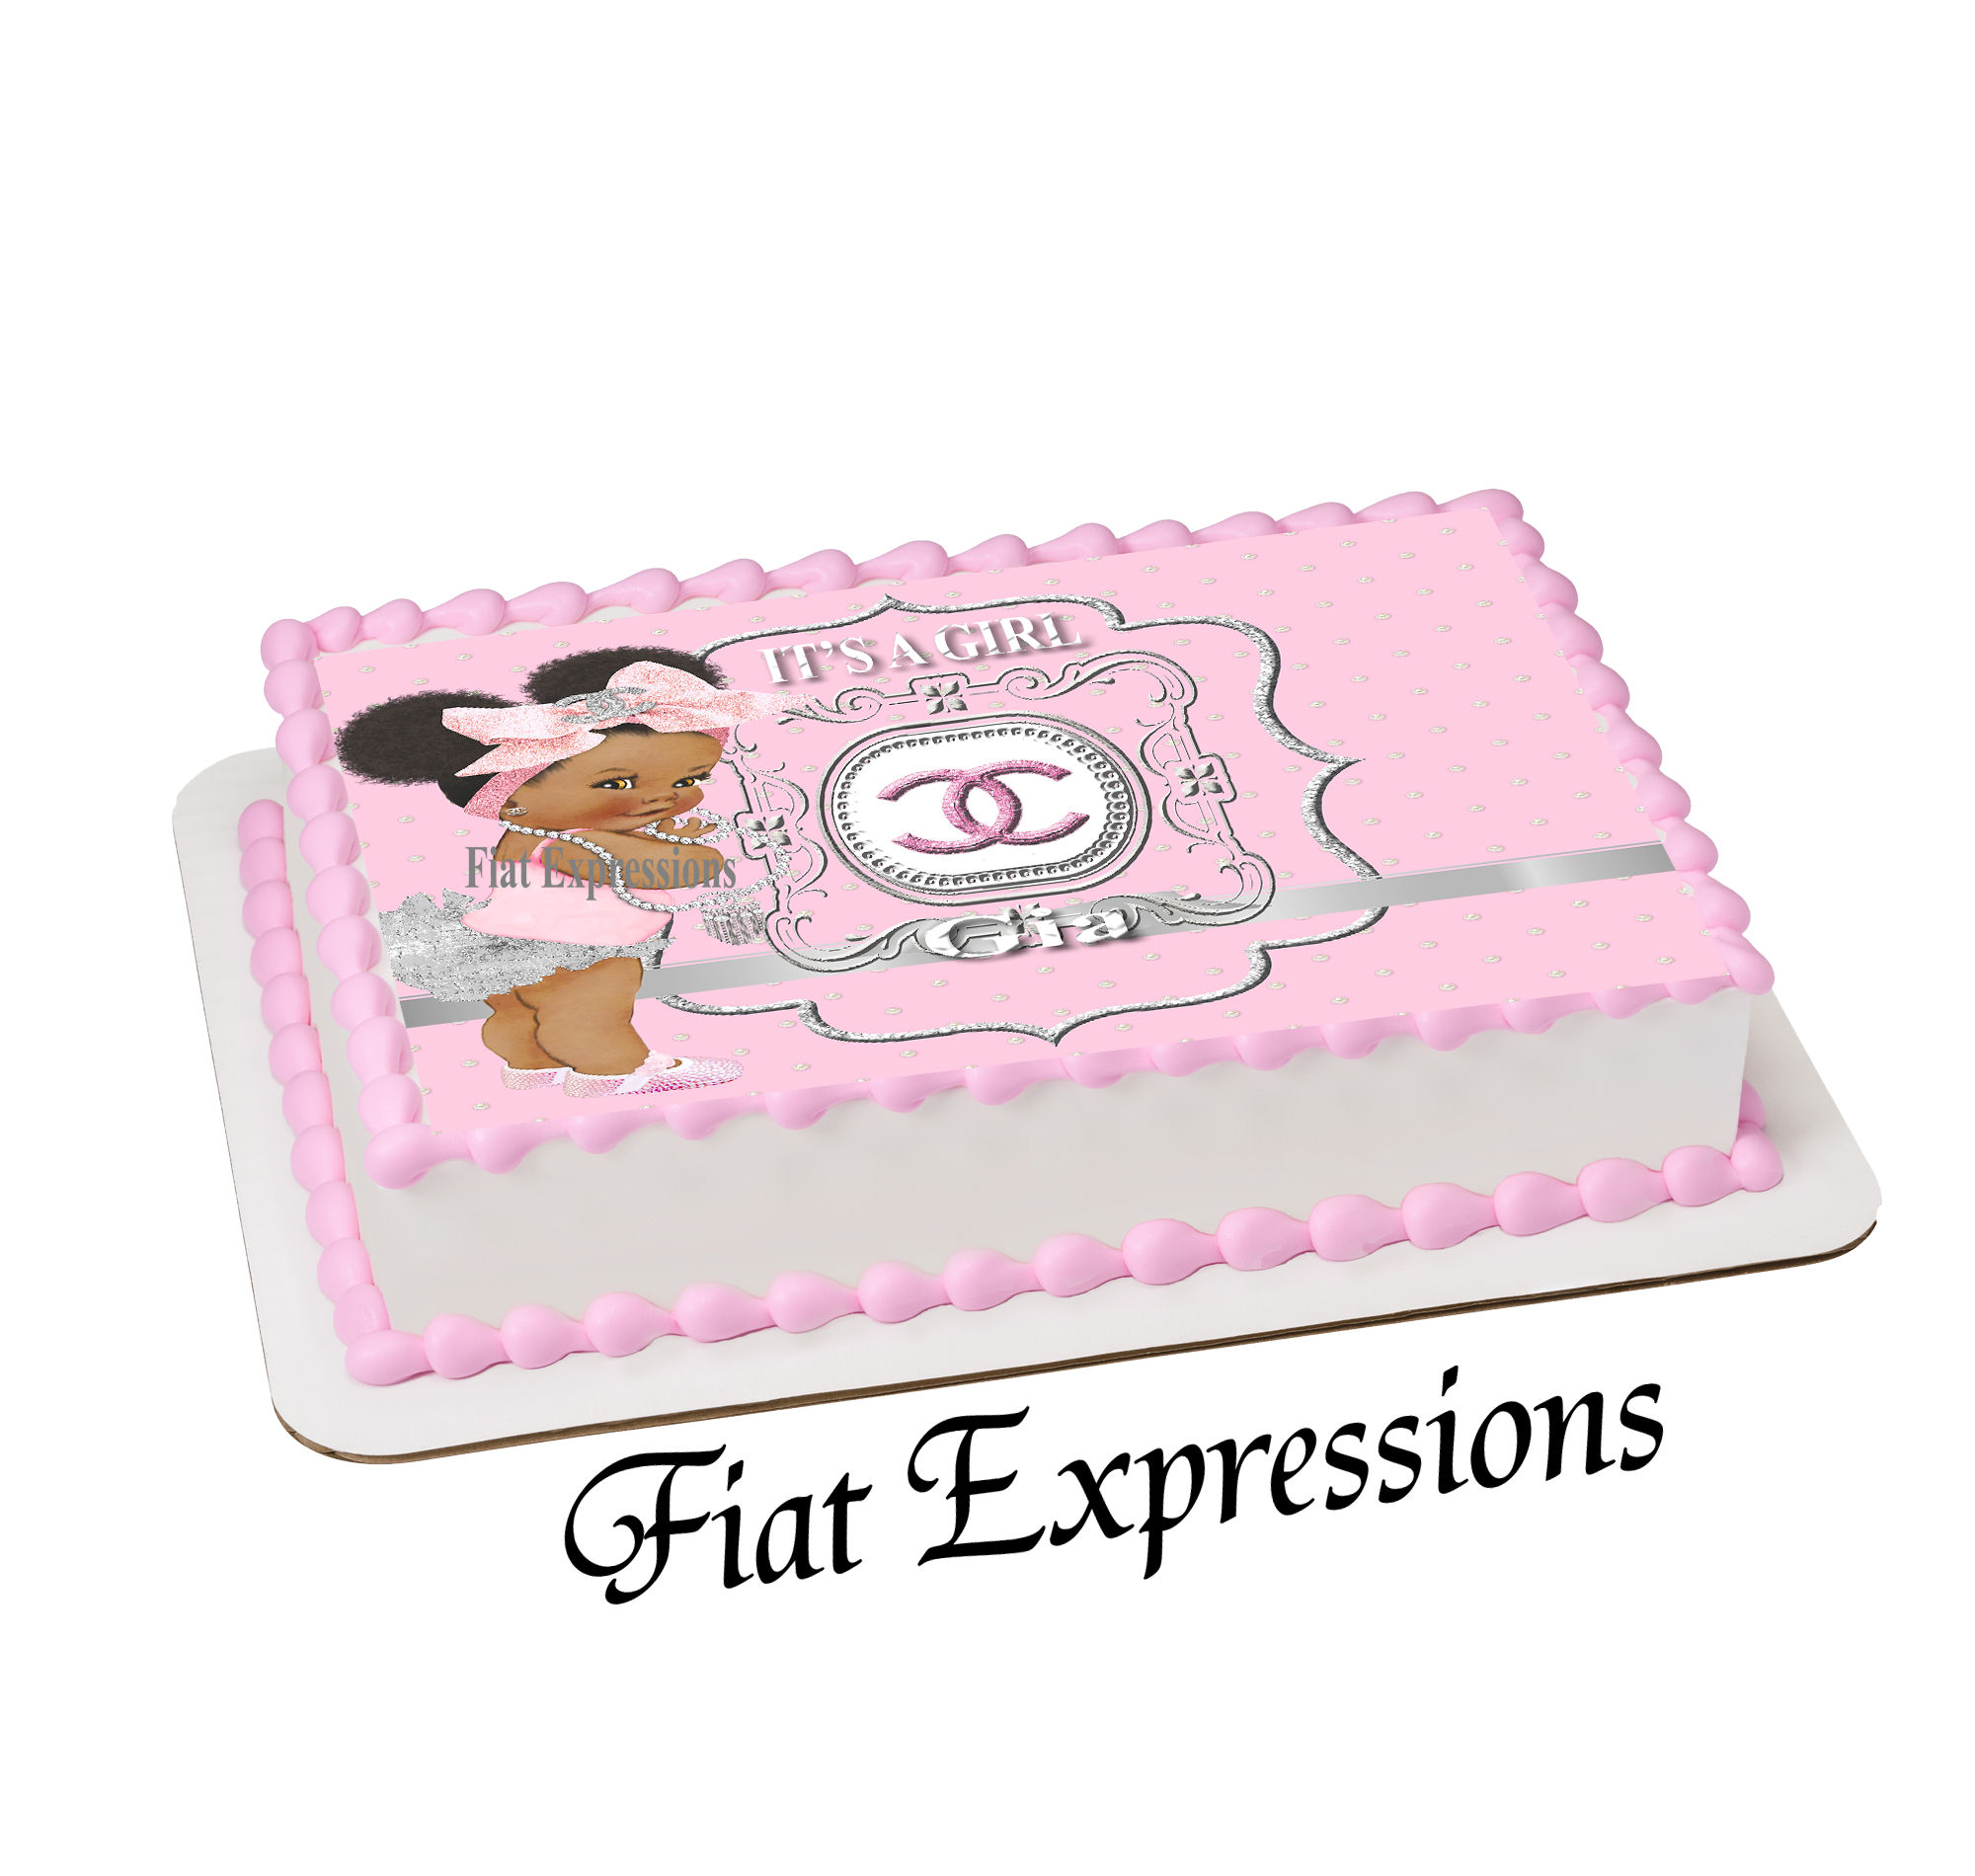 Classy Chic Pink Silver Edible Cake Image | Fiat Expressions